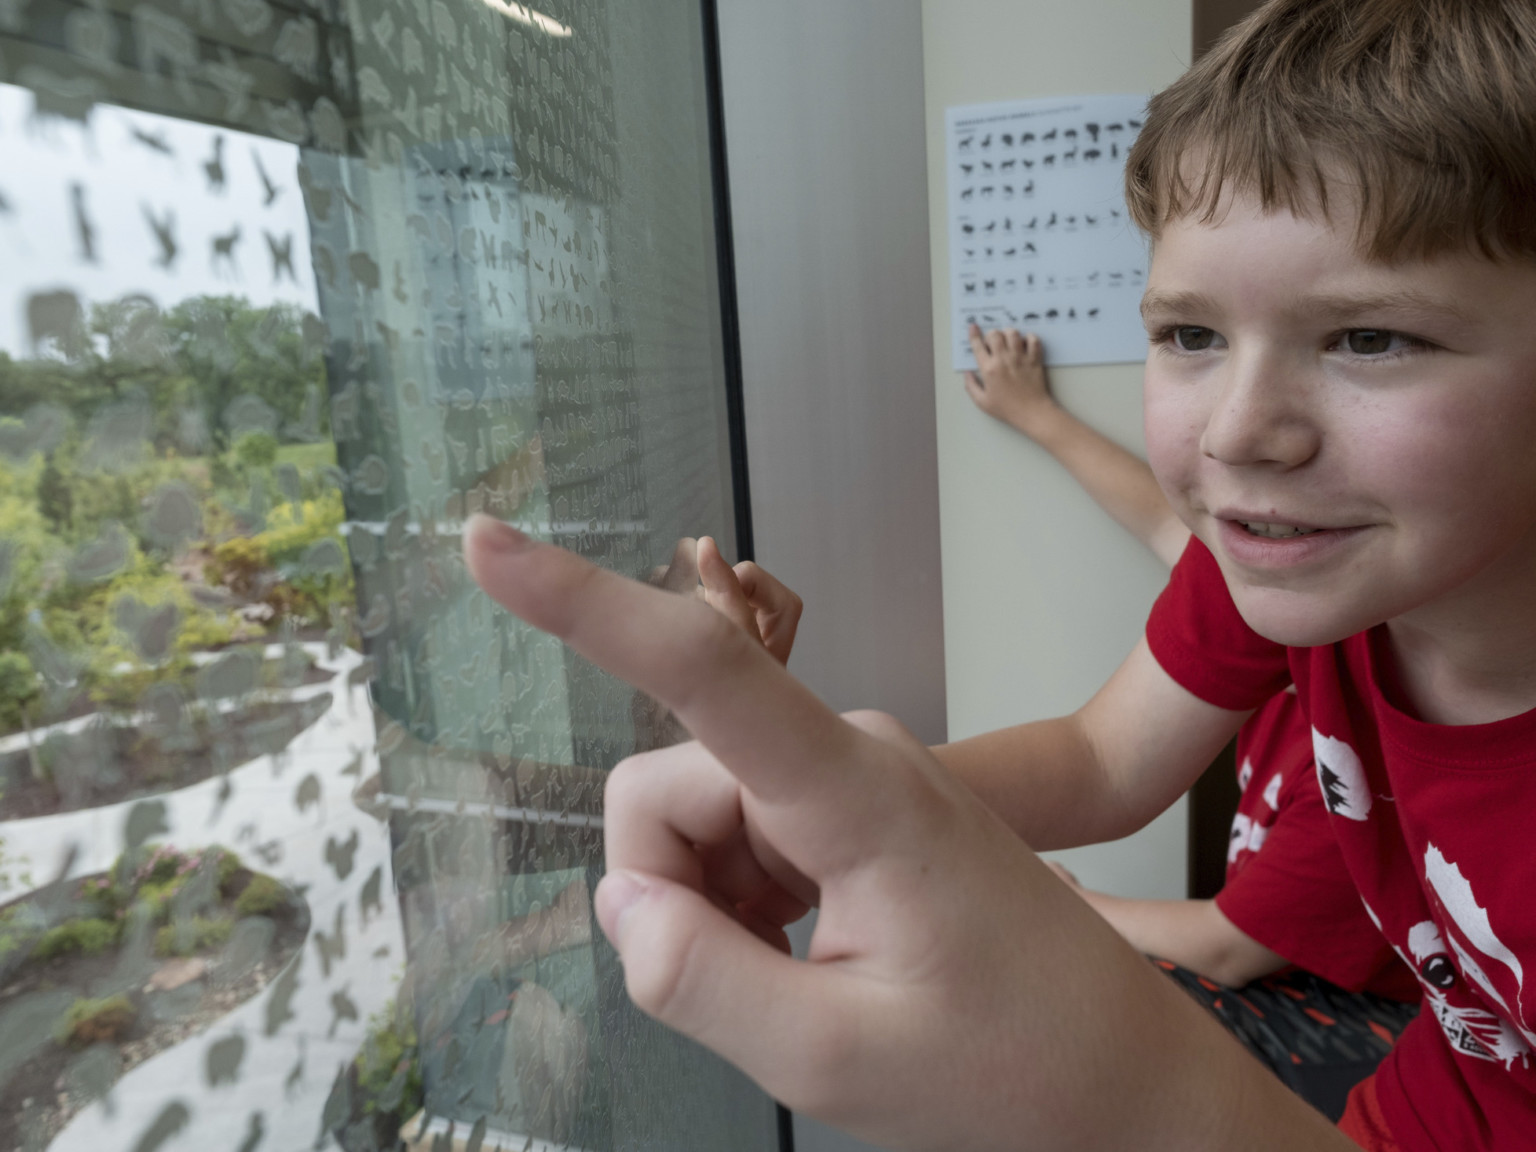 Children find animal shapes from a labeled list on a window of tiny illustrations